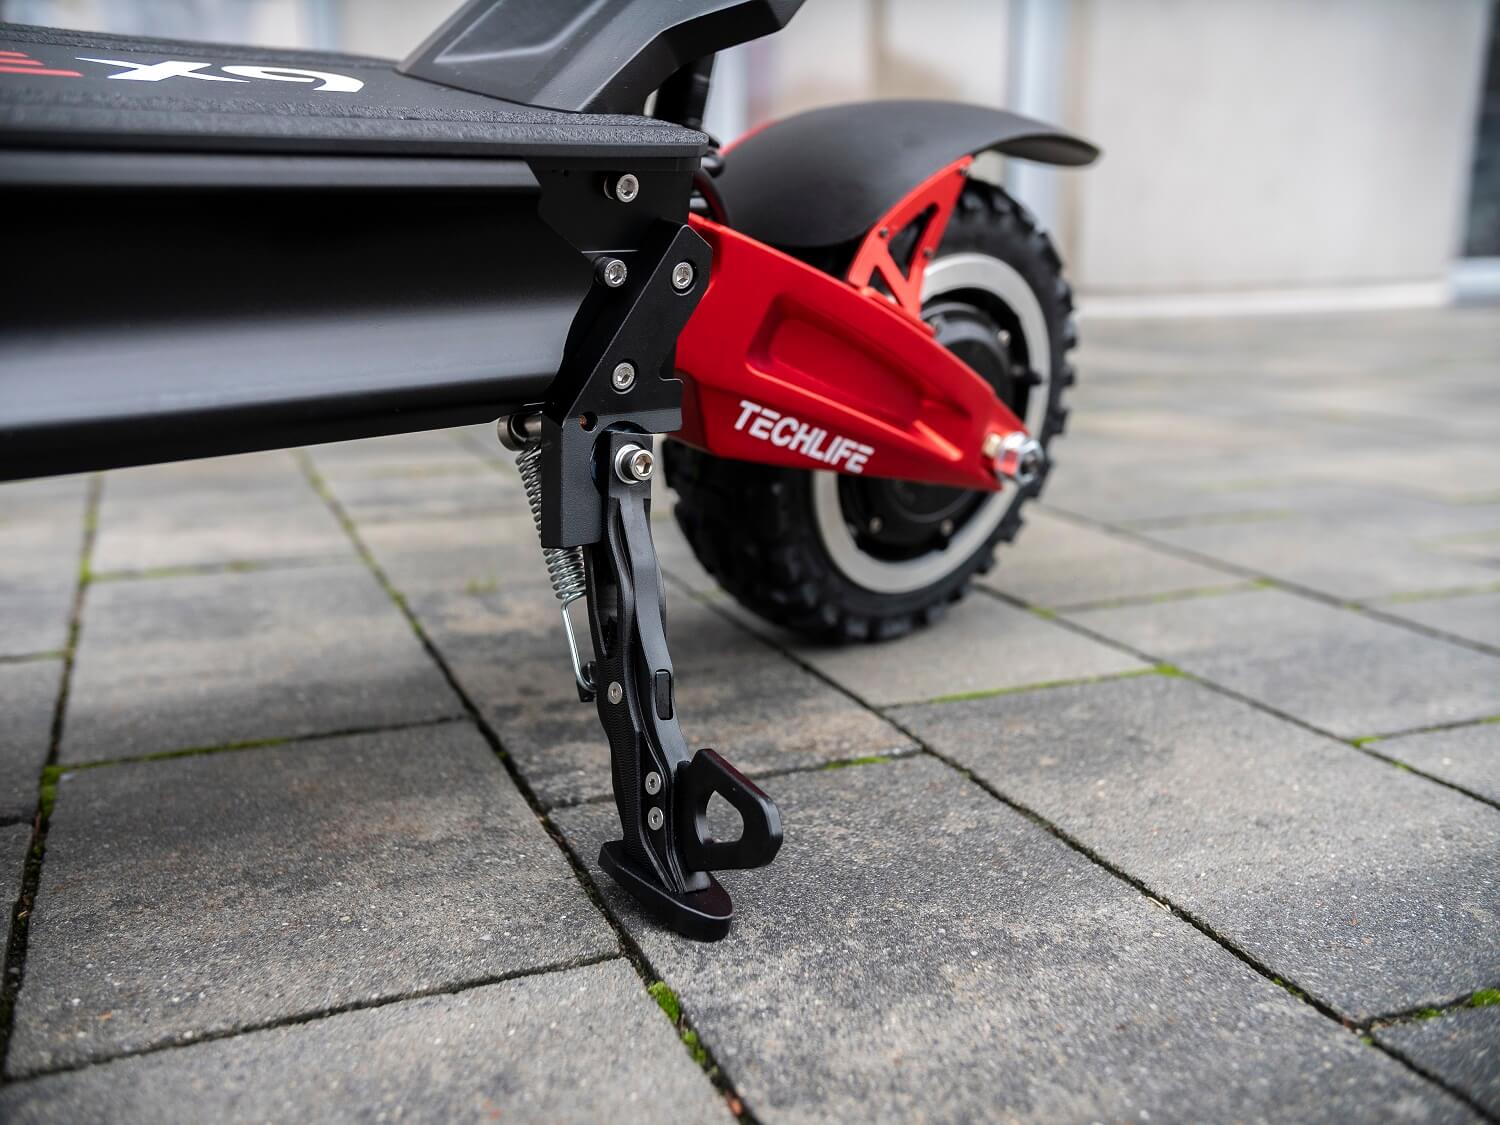 Techlife X9 electric scooter, dual motor, 6000 W 28